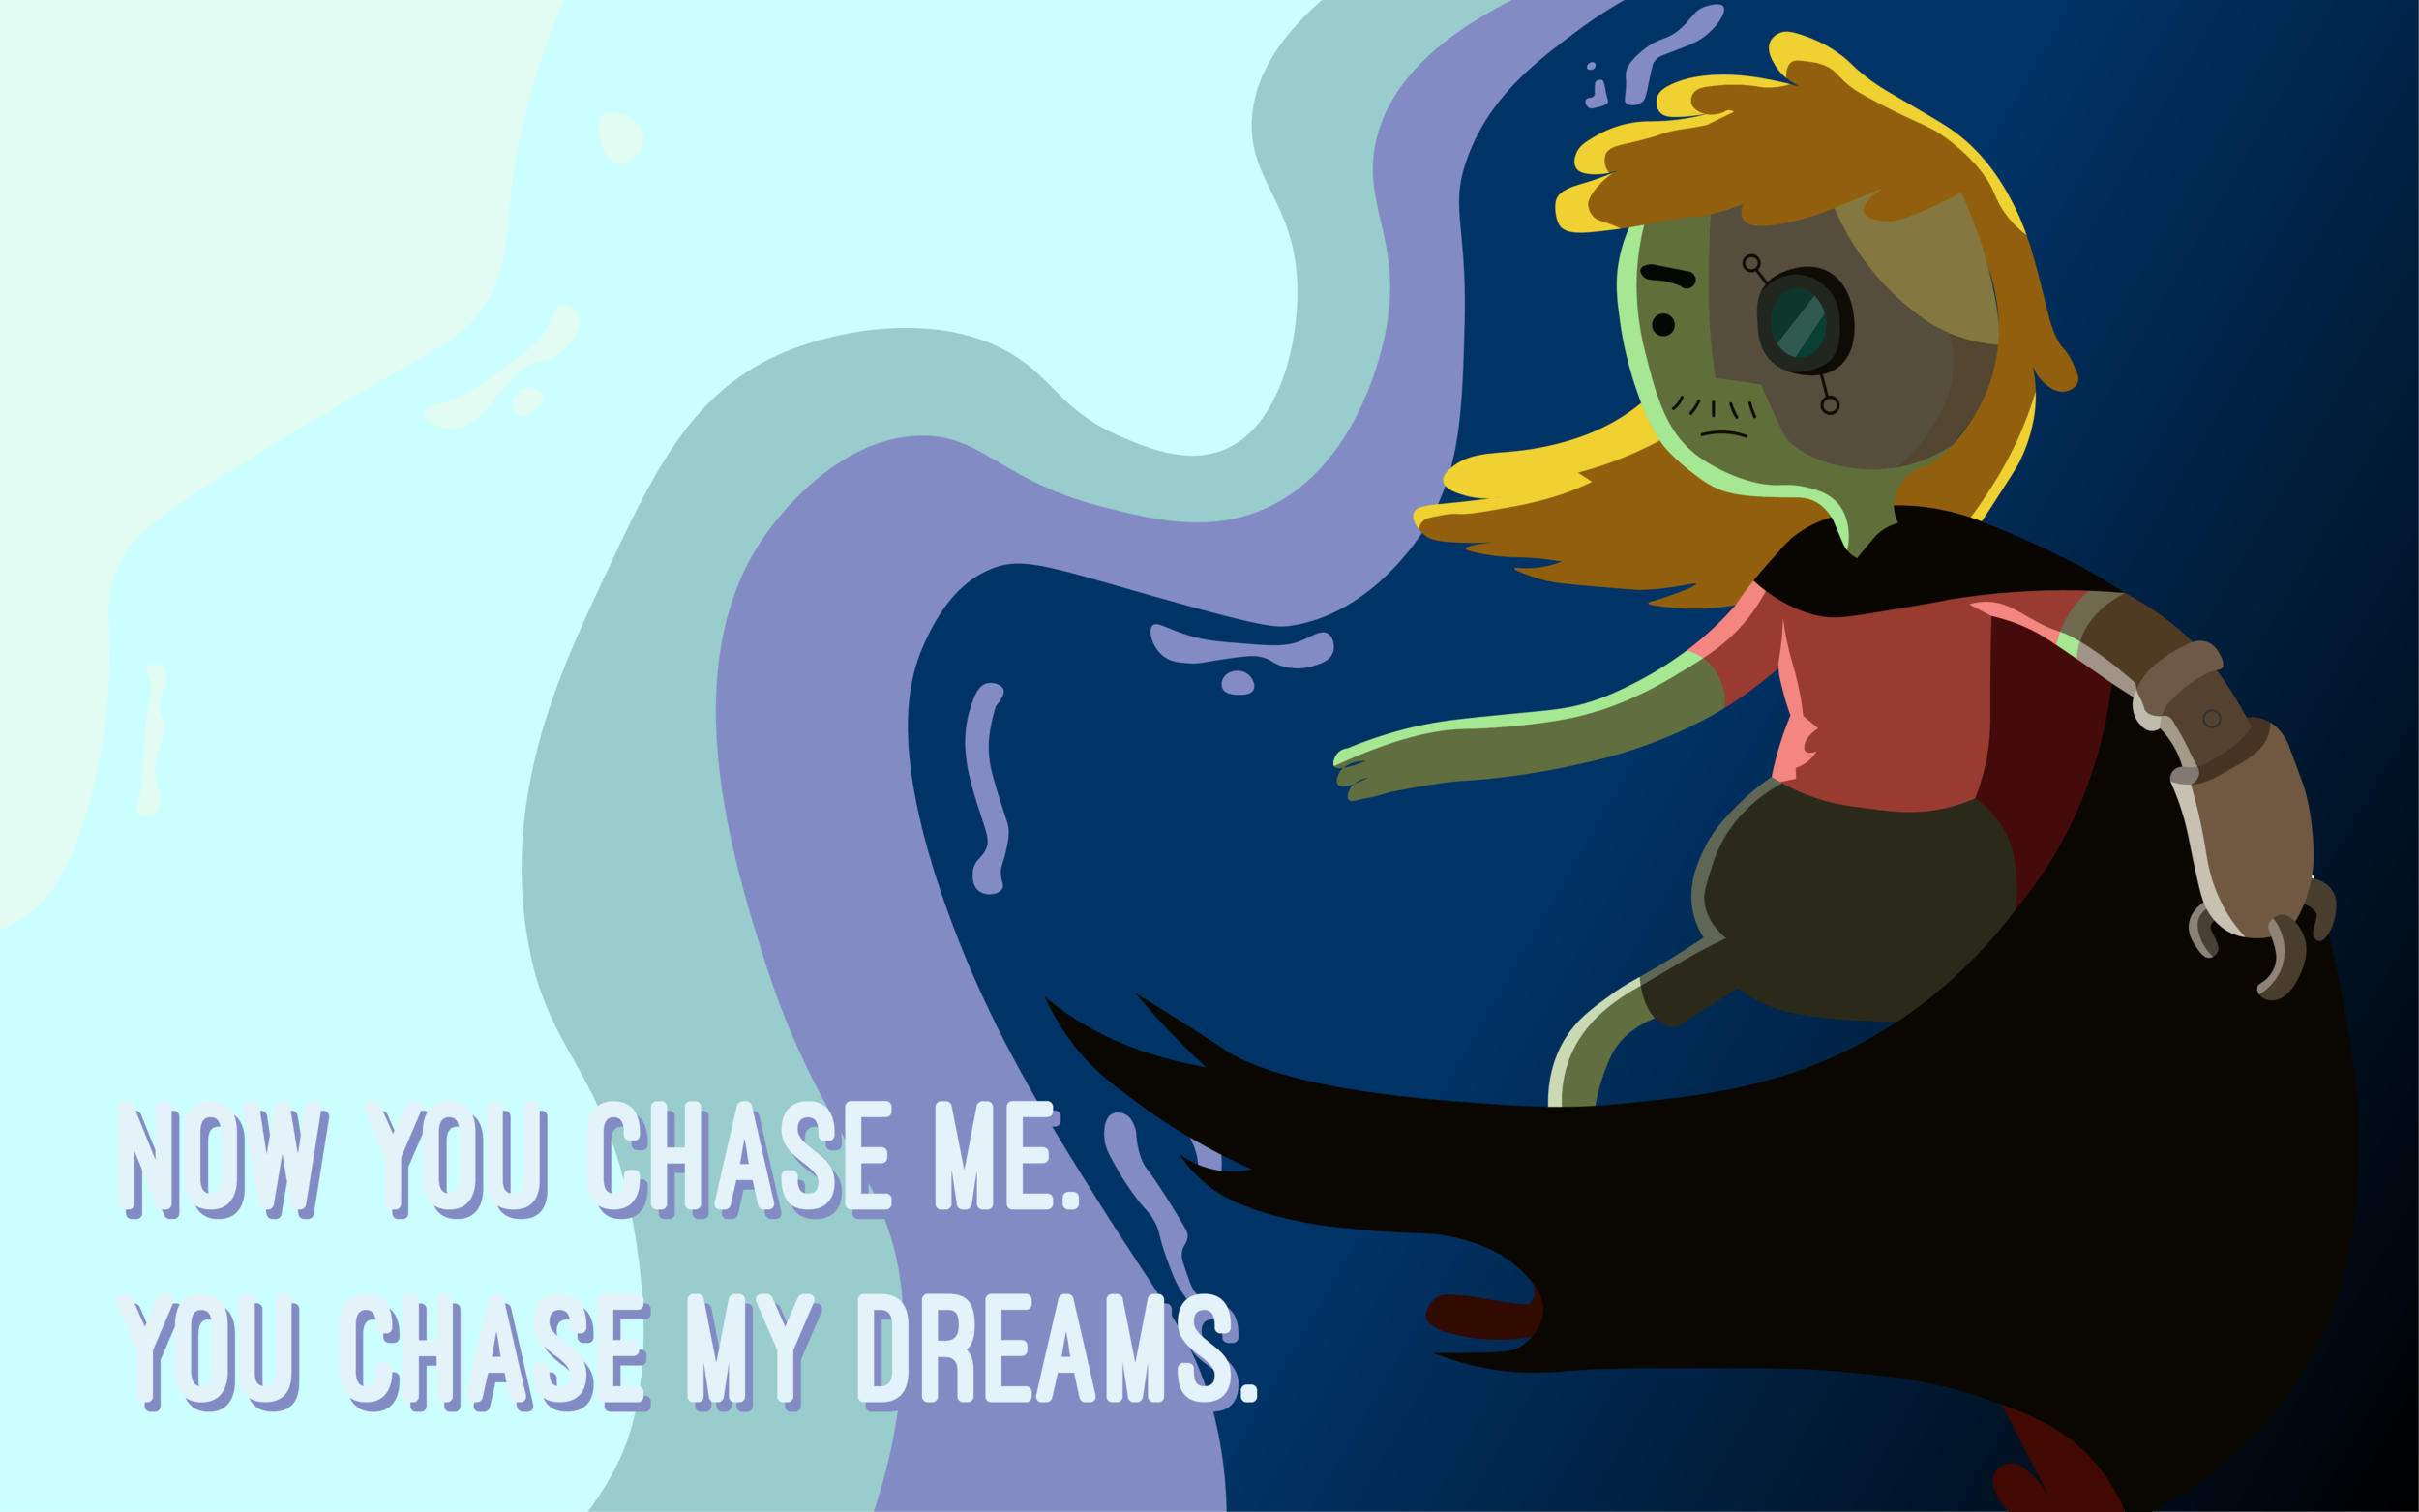 nowyouchasemydreams-01.png